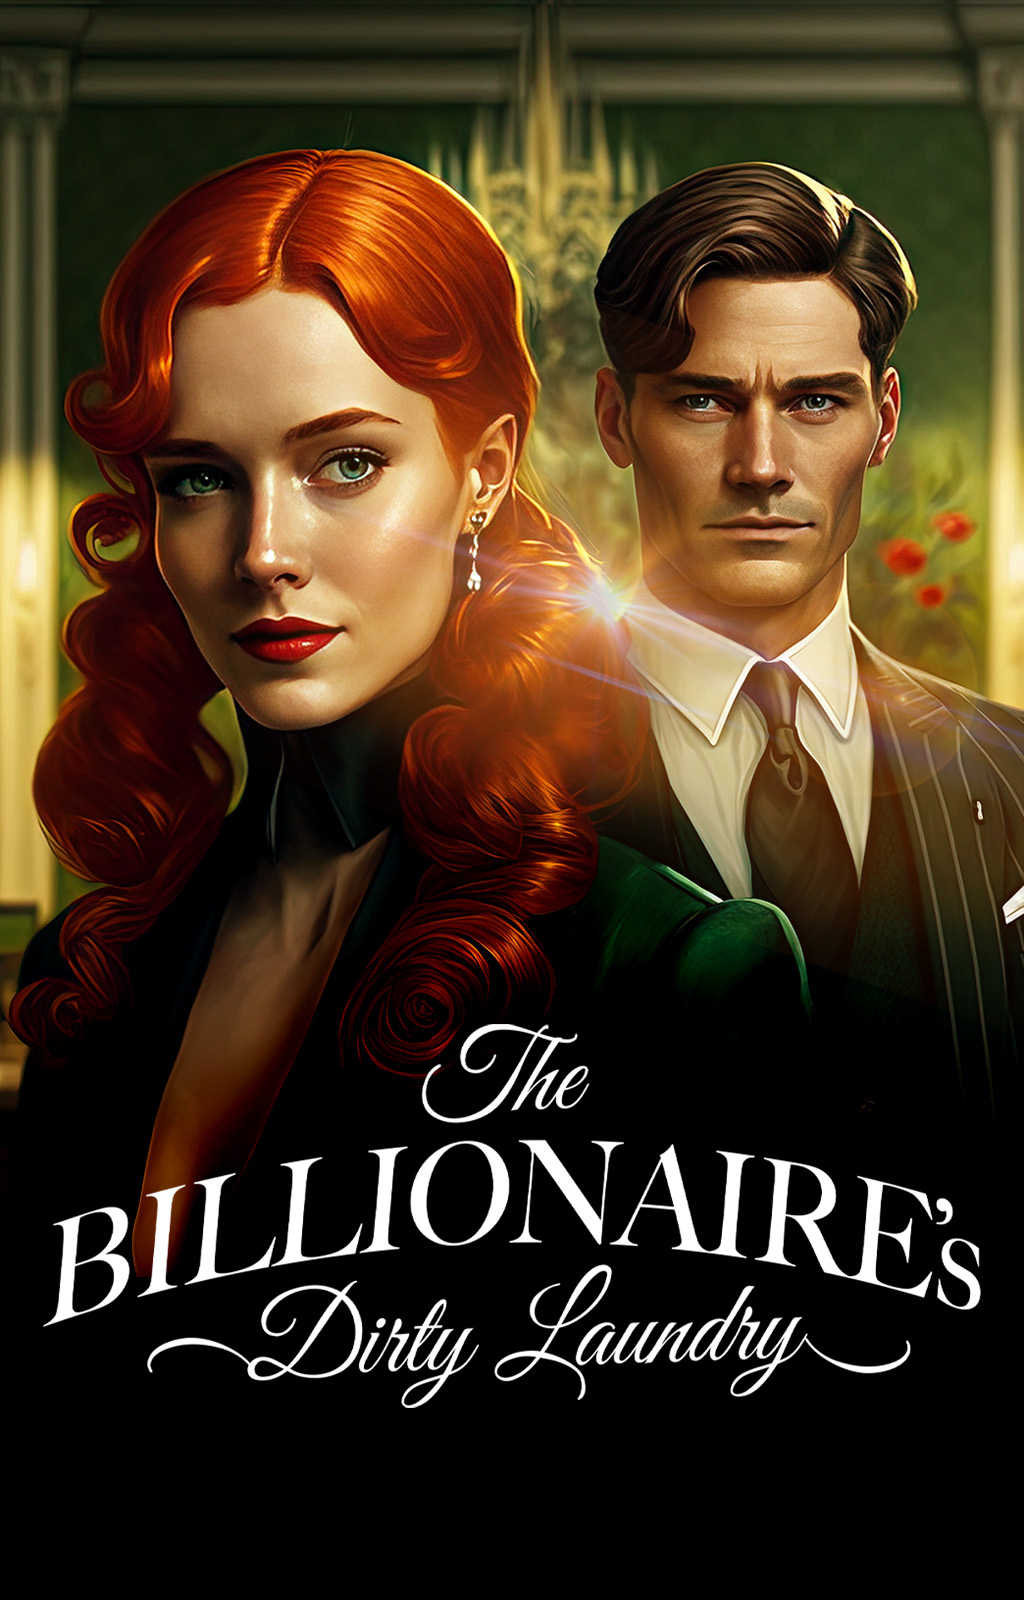 The Billionaire's Dirty Laundry - Book cover